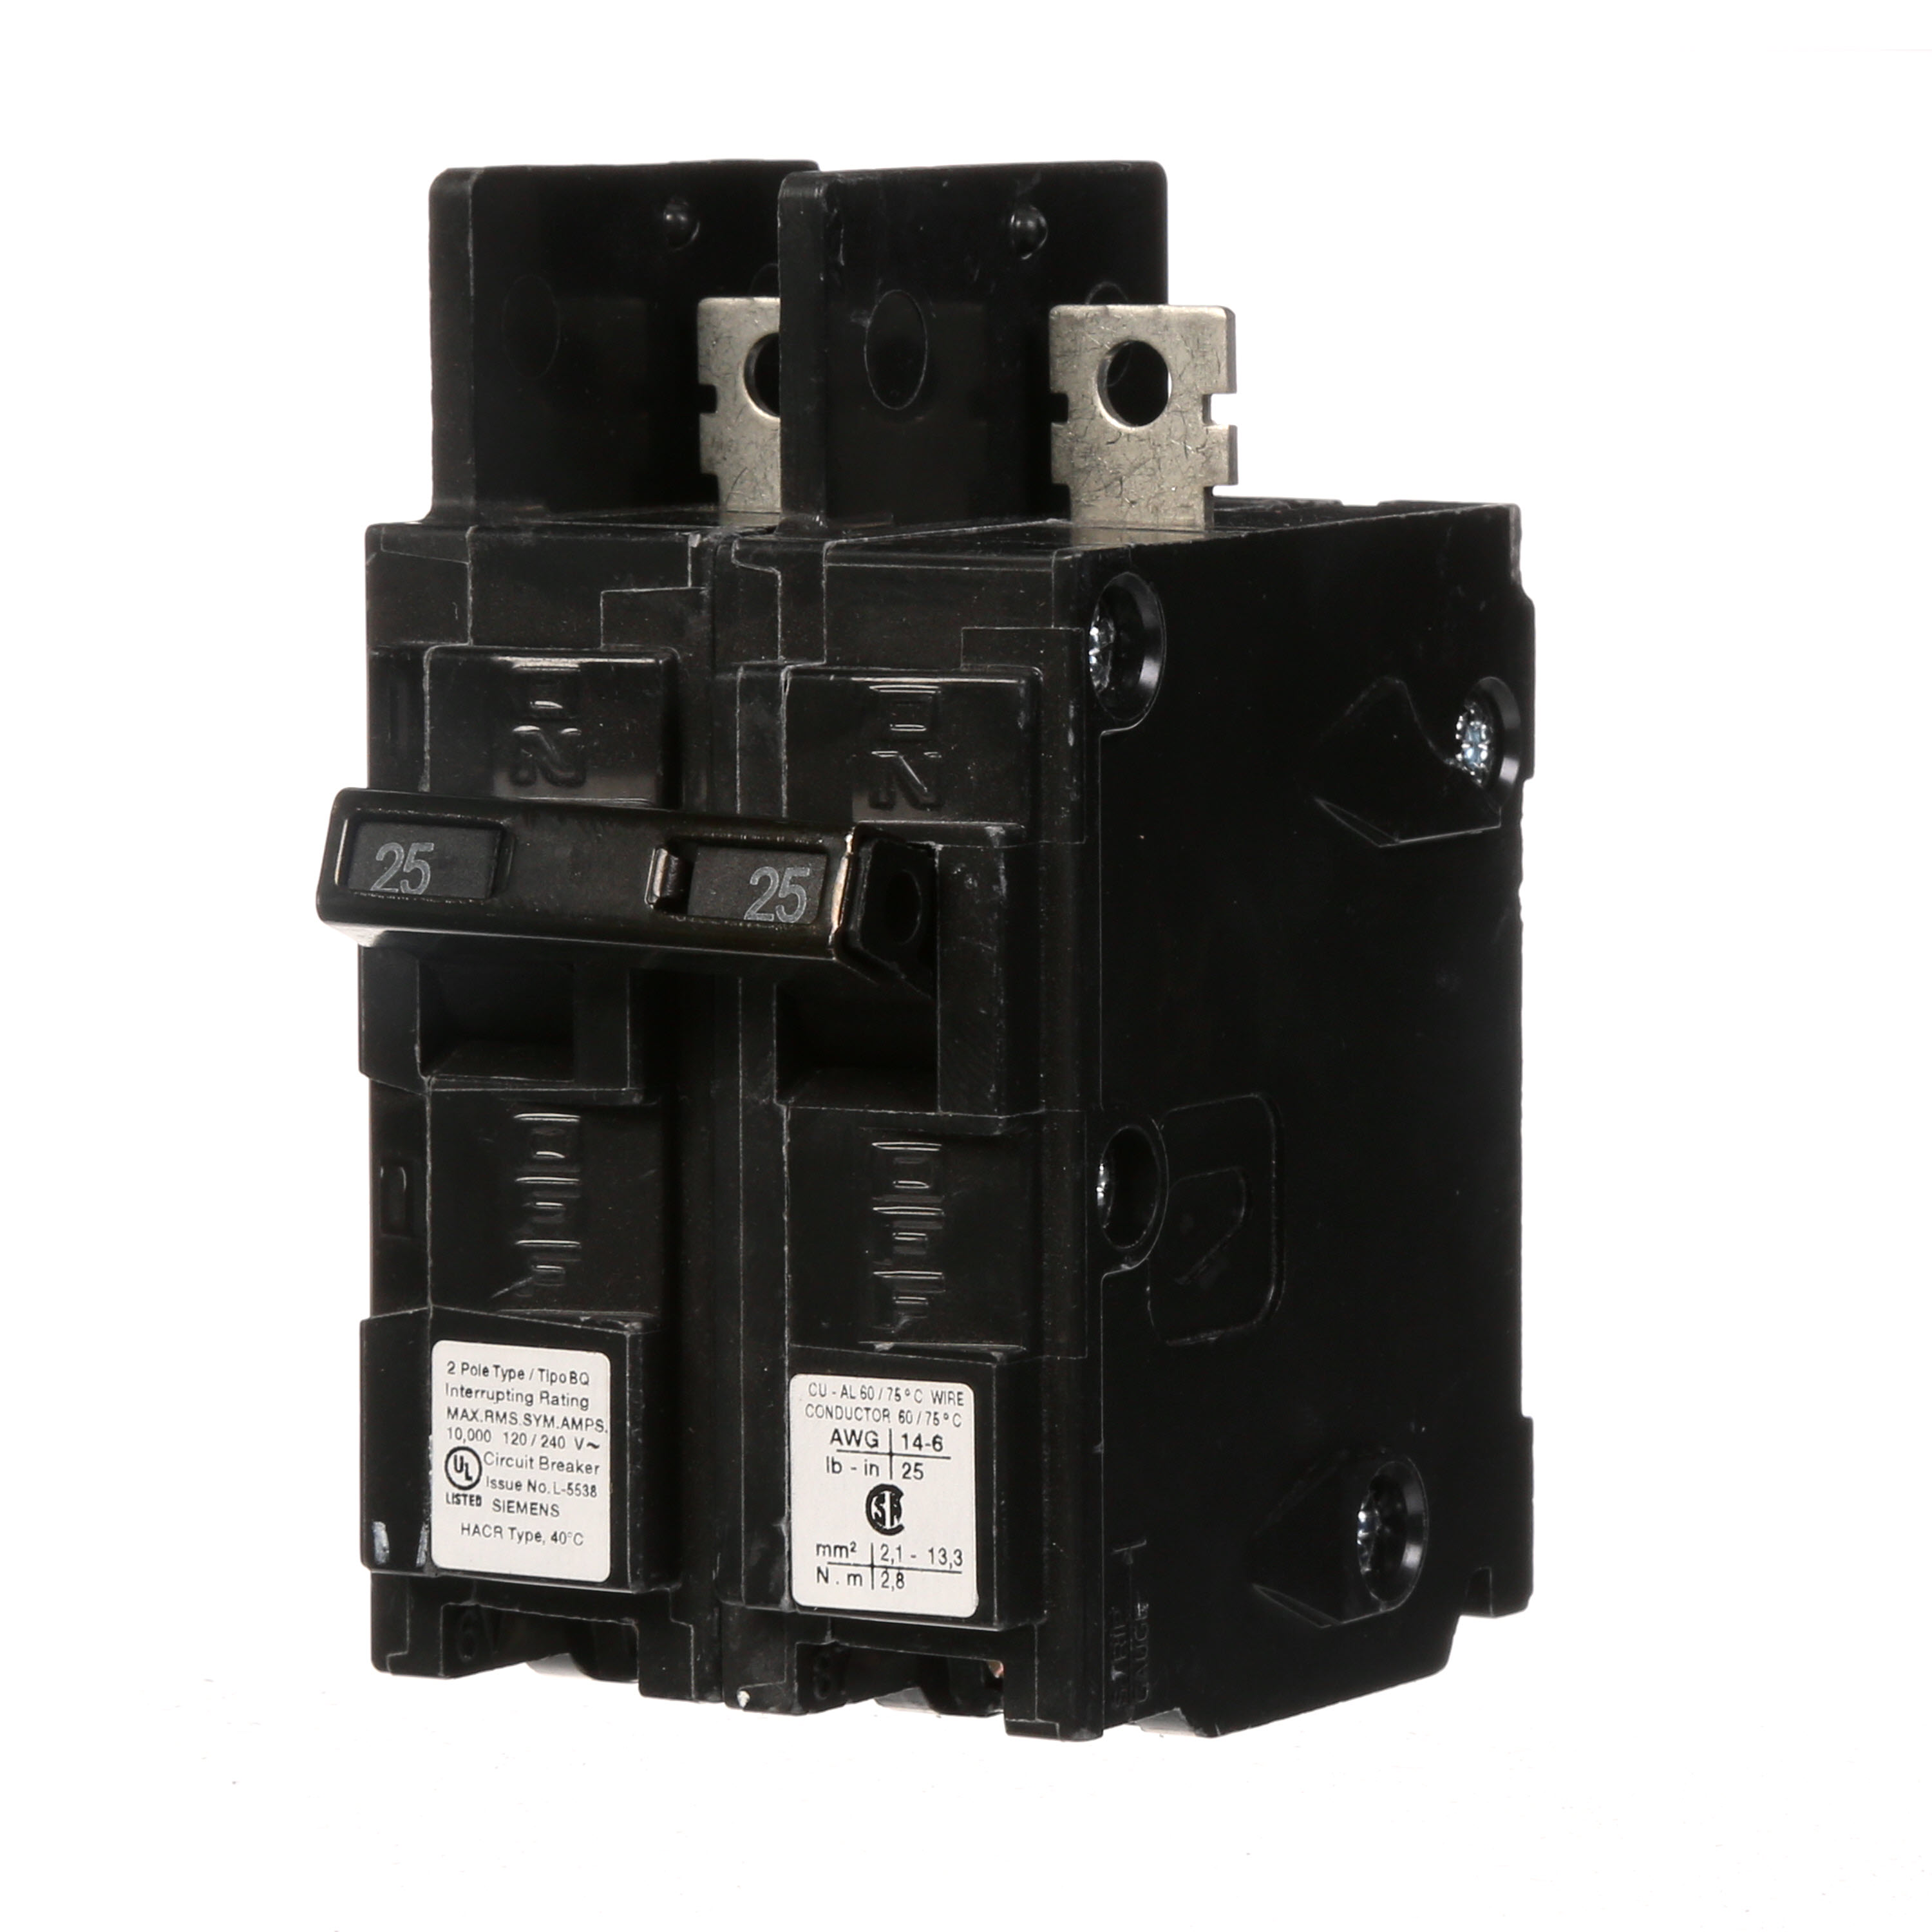 Siemens Low Voltage Molded Case Circuit Breakers General Purpose MCCBs - Type BQ, 2-Pole, 120/240VAC are Circuit Protection Molded Case Circuit Breakers. 2-Pole Common-Trip circuit breaker type BQ. Rated 120/240V (025A) (AIR 10 kA). Special features Load side lugs are included.